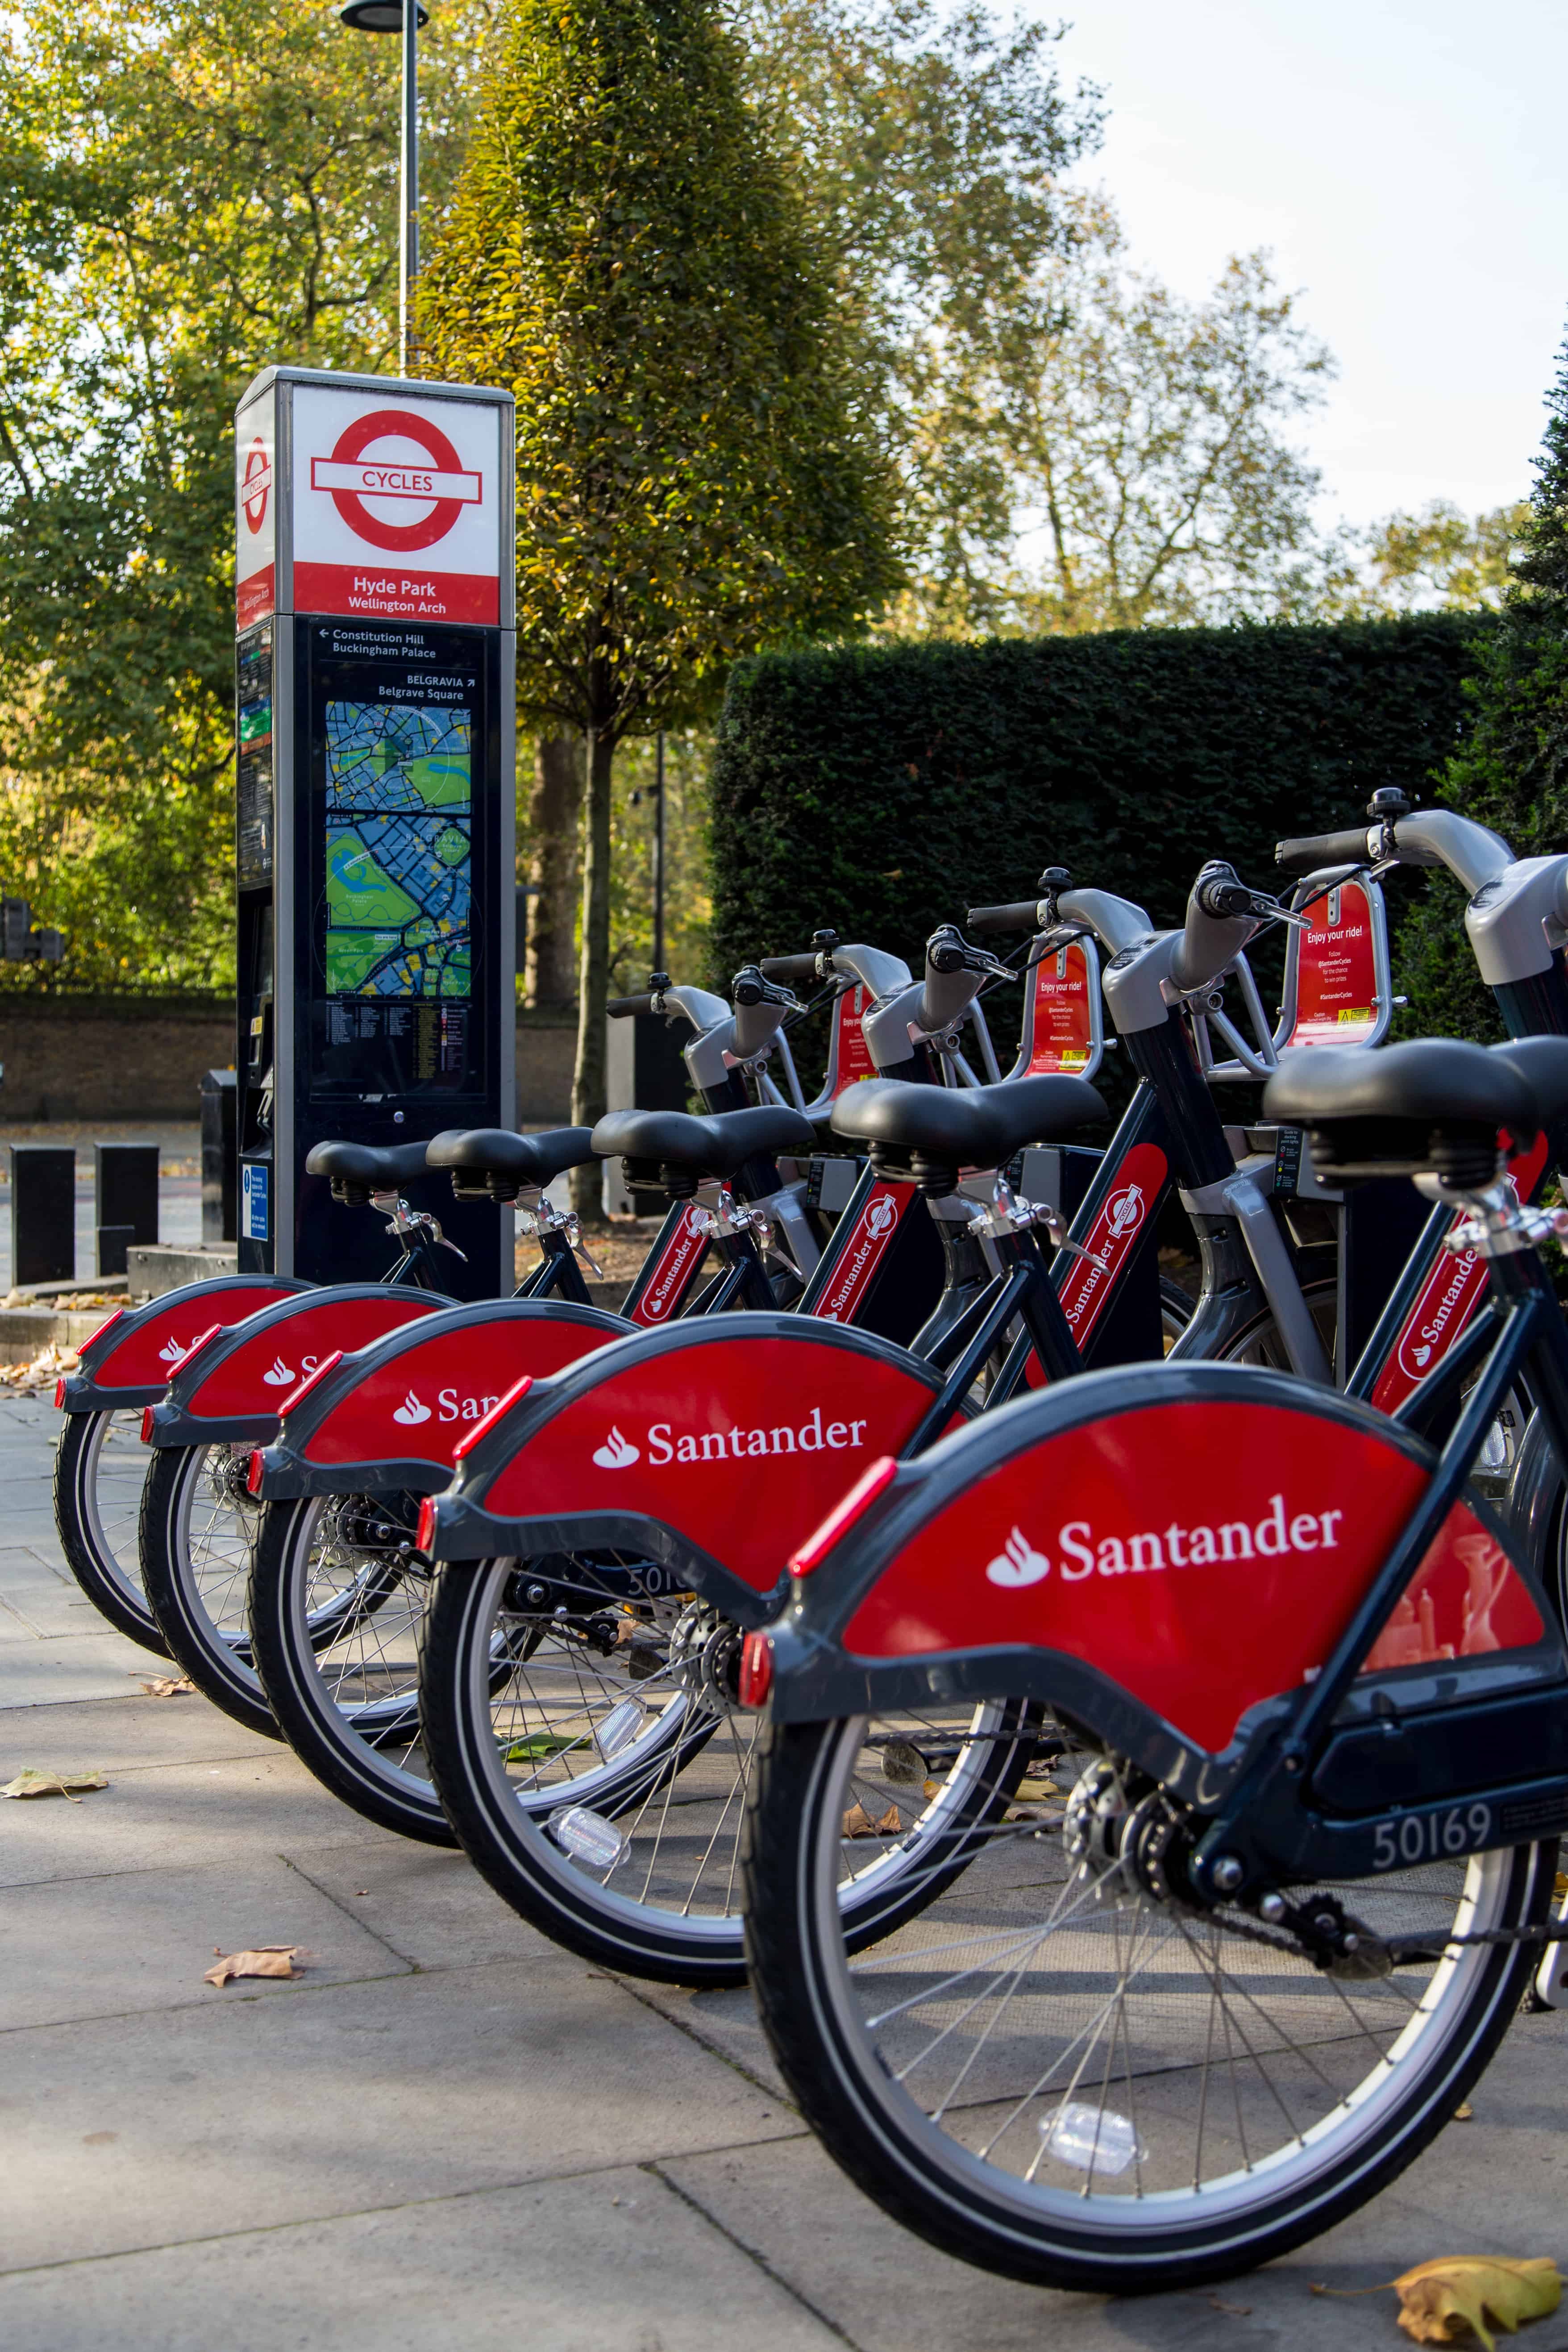 Santander cycles will be coming to Bermondsey and Rotherhithe but the